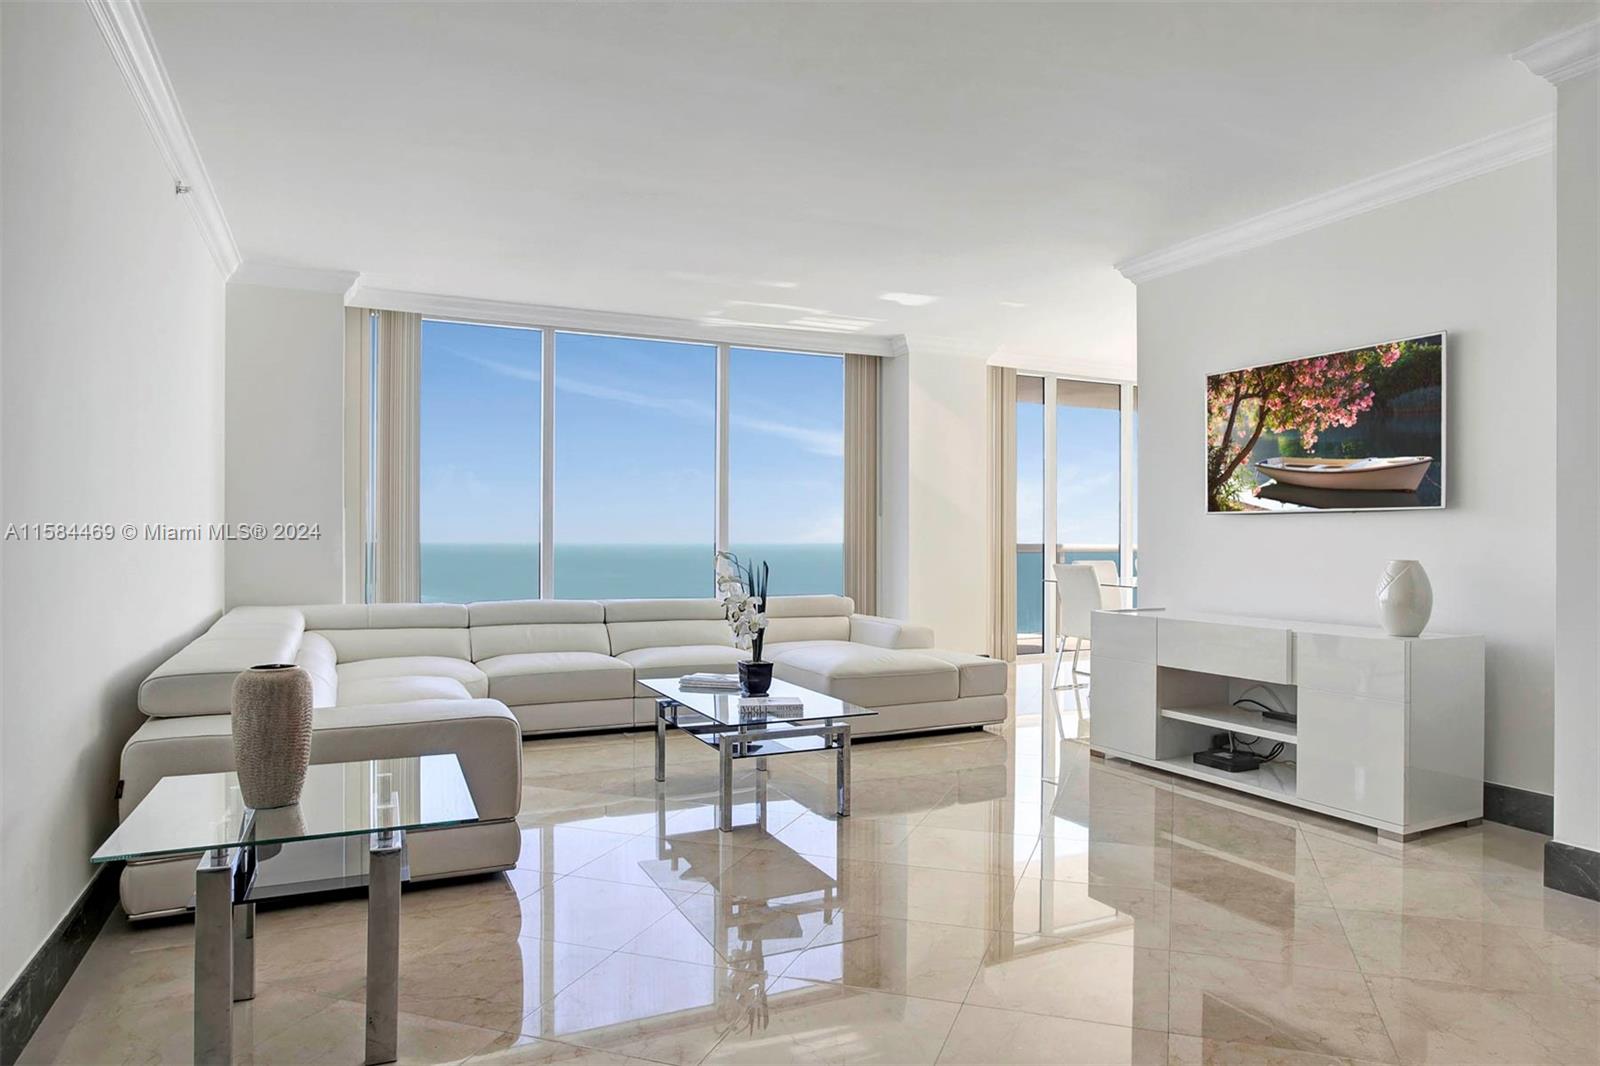 Beautiful 3 bedroom and 3 bath with direct oceanfront views. Floor-to-ceiling windows showcase breathtaking vistas of both the ocean and city . Two terraces to enjoy the scenery. The en suite main bedroom boasts a spacious walk-in closet, large bathroom with separate enclosed glass shower, and jacuzzi tub. Located in The Blue Diamond condo with great amenities, in the prime mid Miami Beach location. Available for 6-7 months starting November 1, 2024. Don't miss out on this opportunity to live in paradise